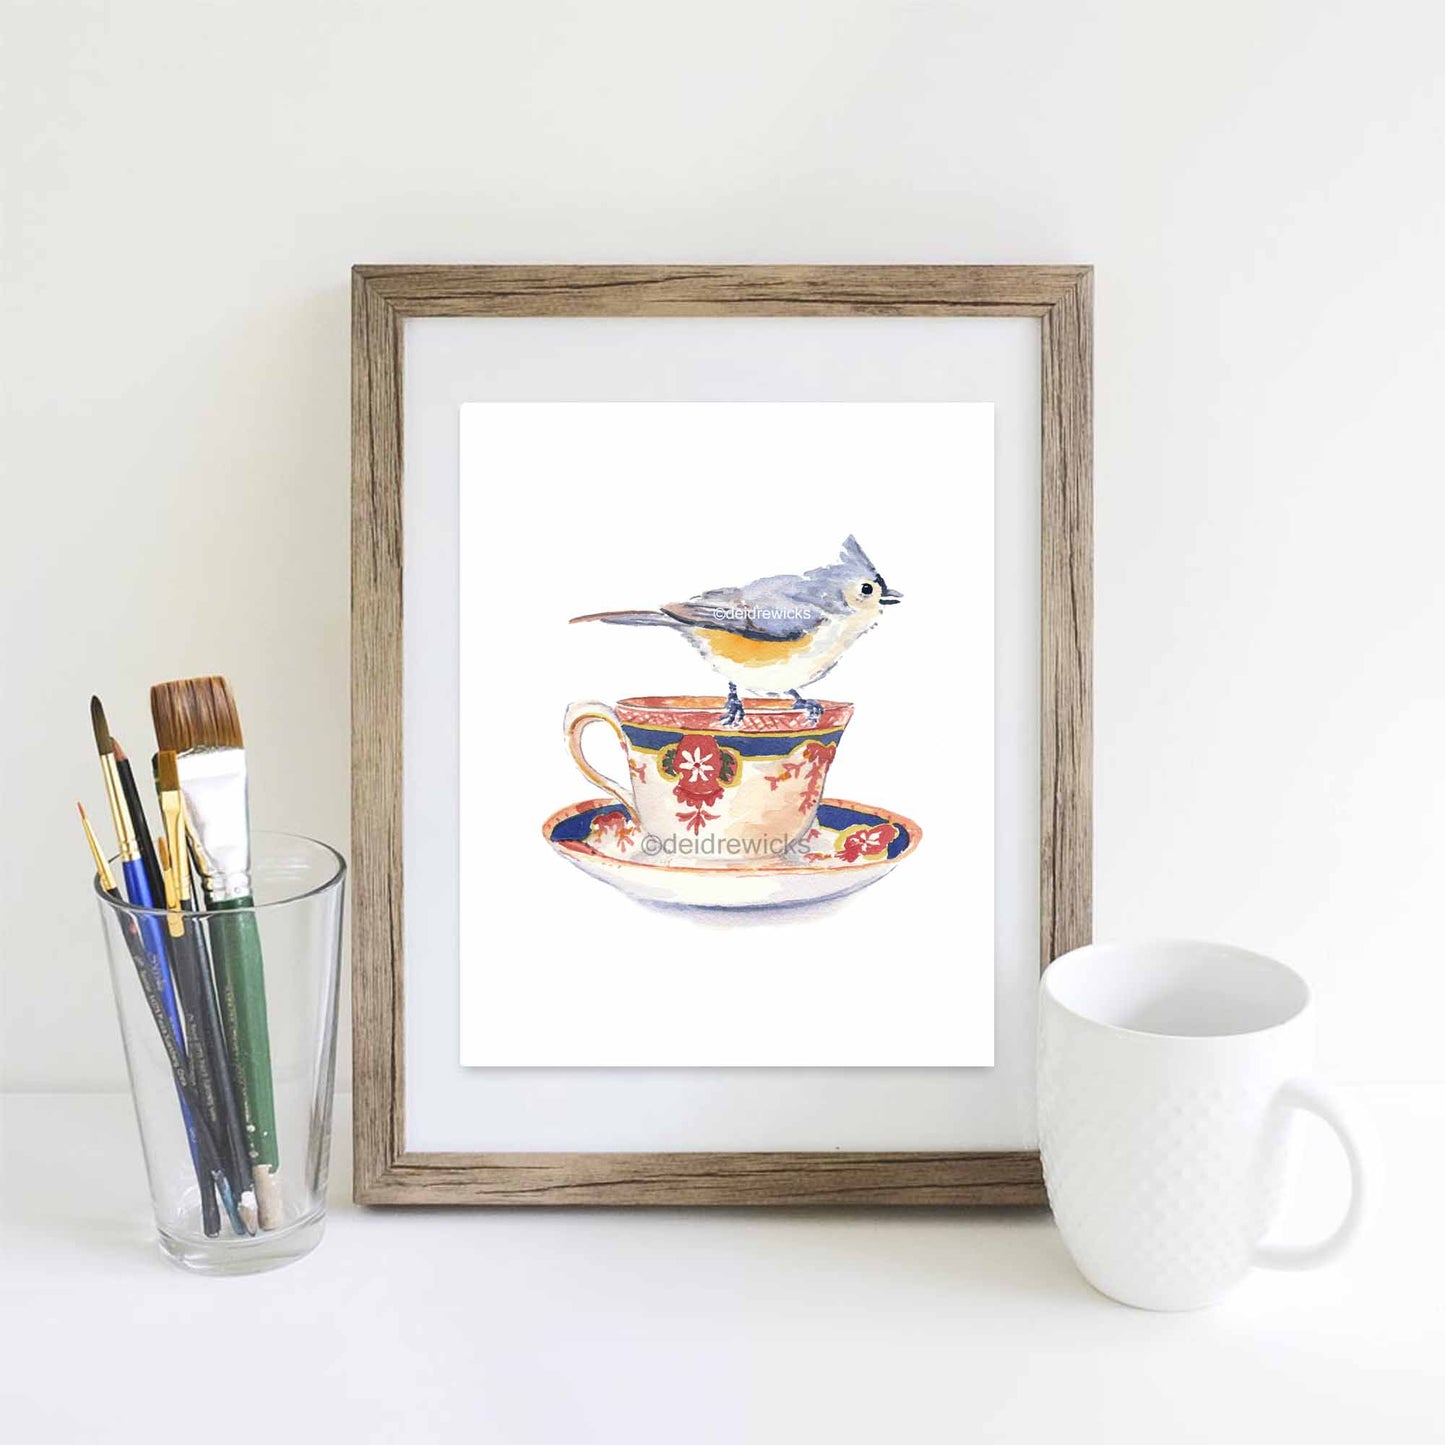 Suggested framing for a bird watercolor painting print by Deidre Wicks